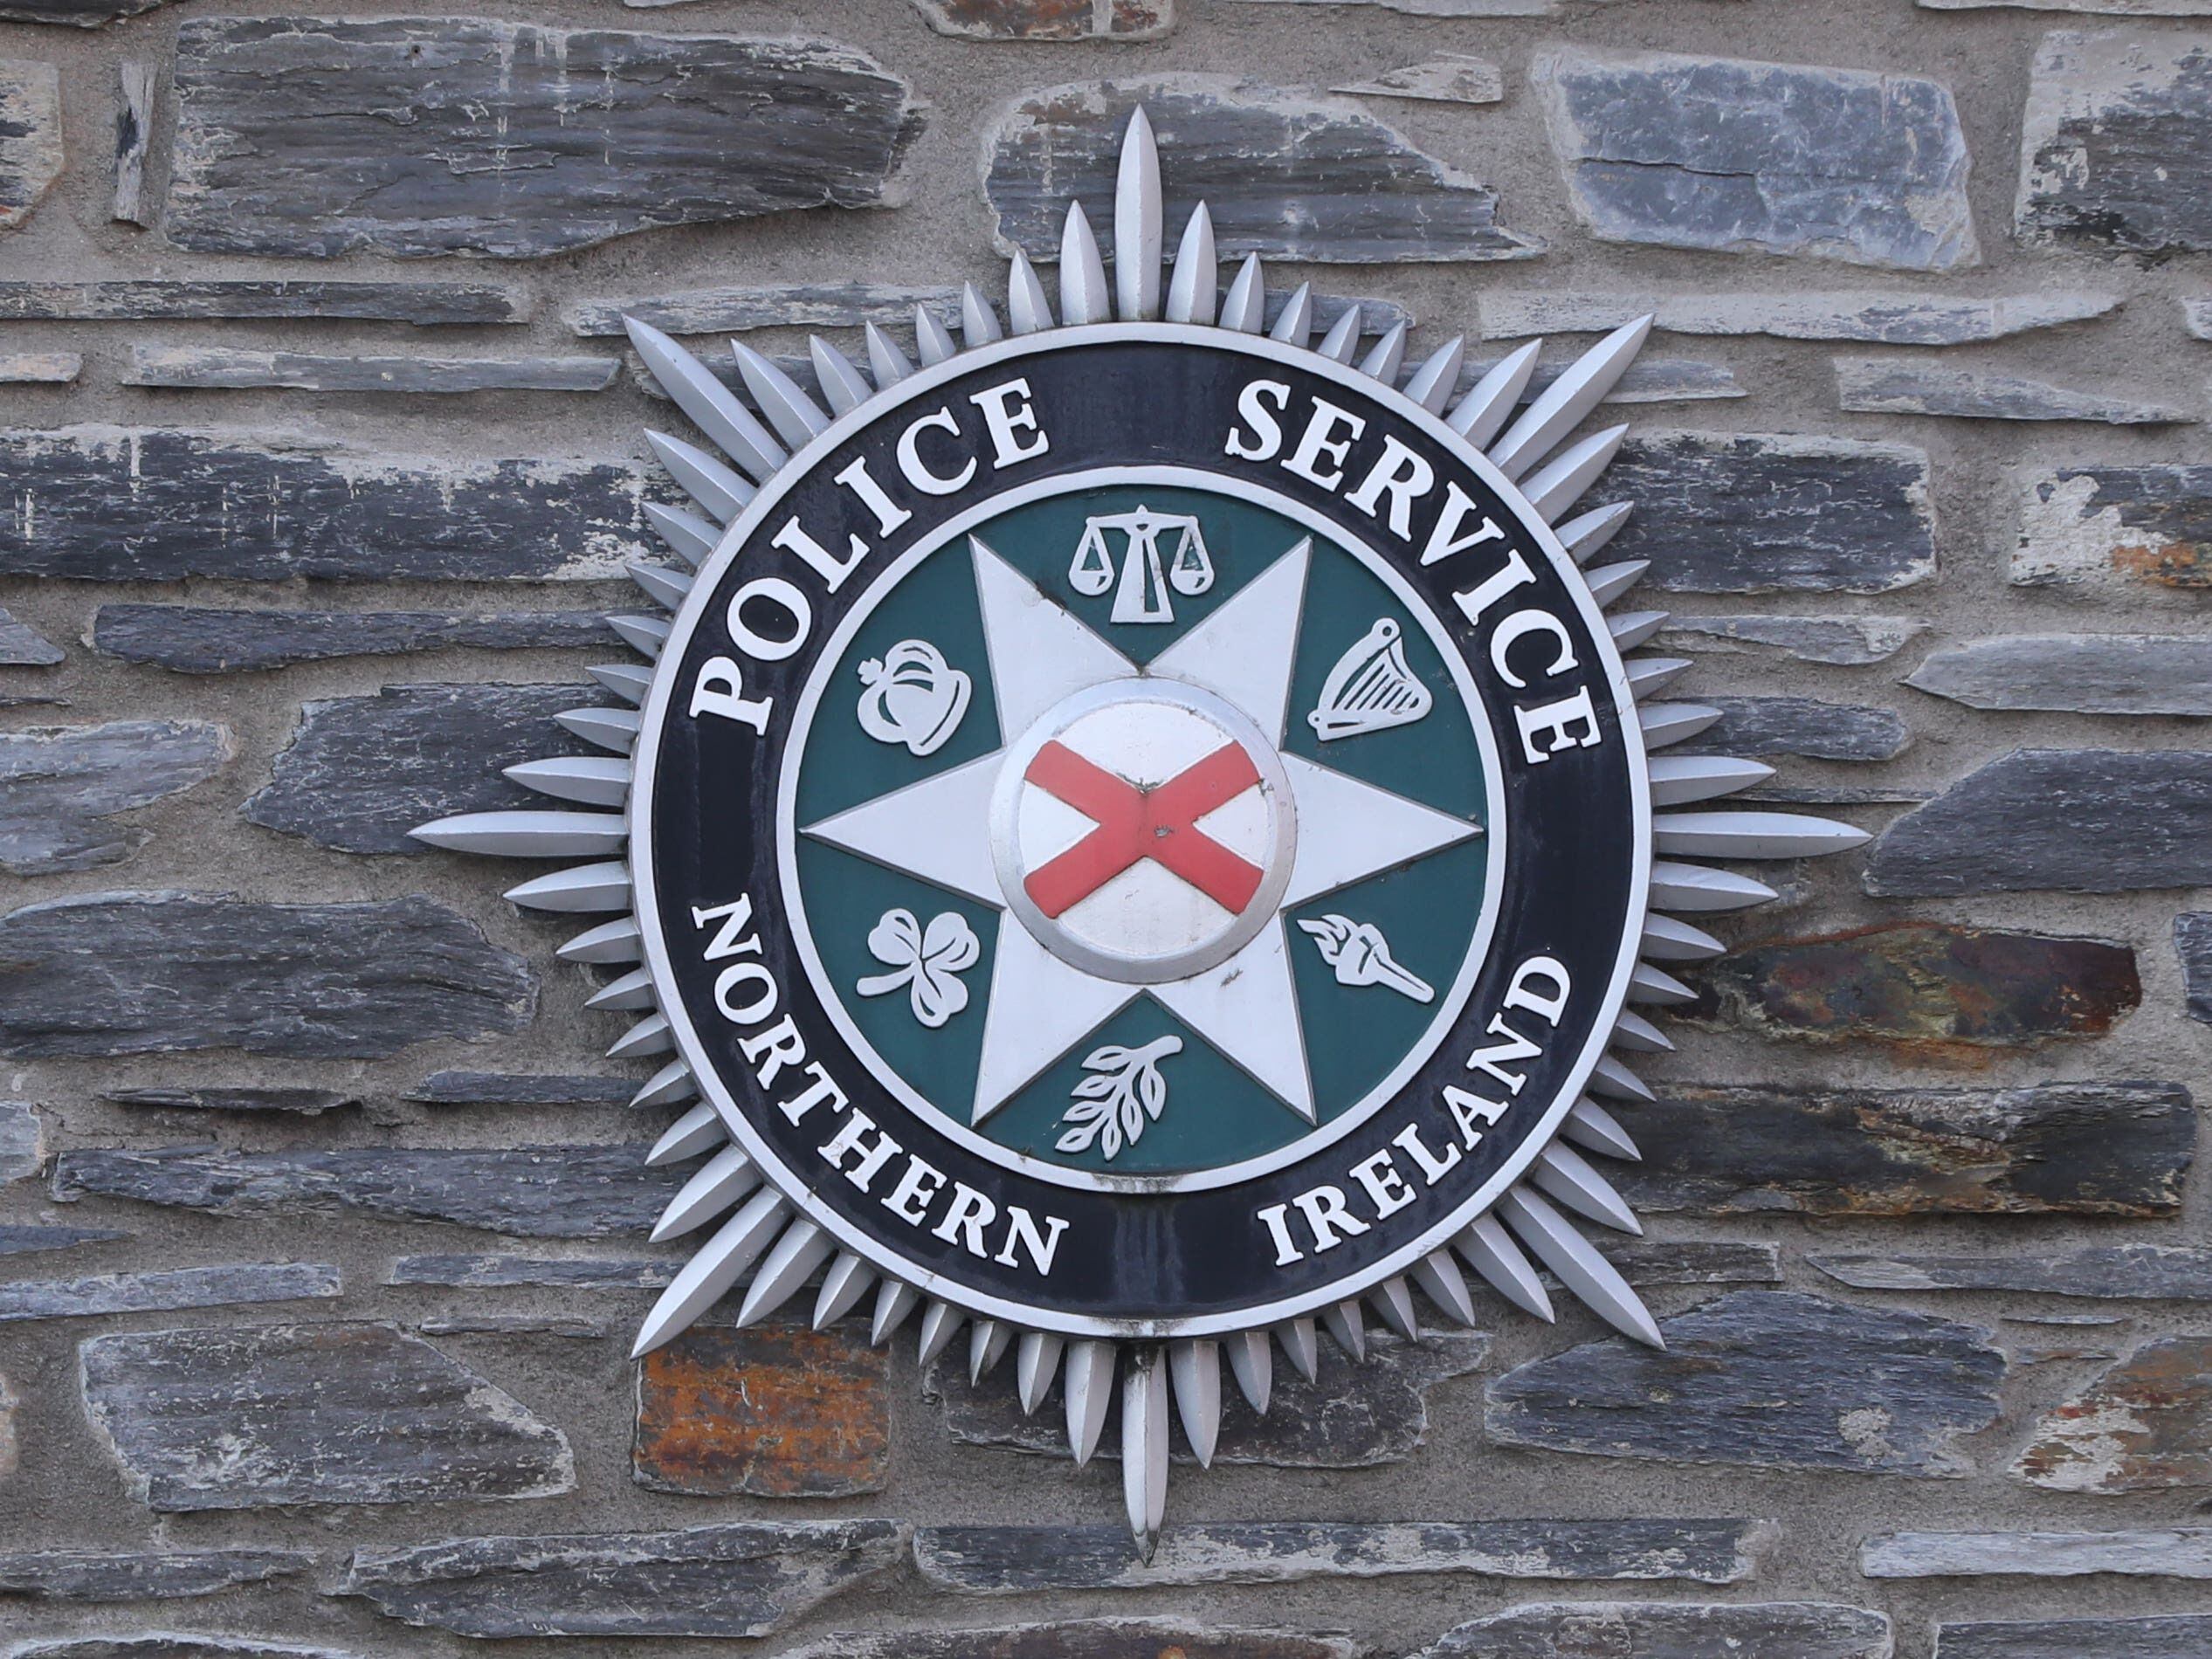 Four people killed in single-vehicle crash in Armagh